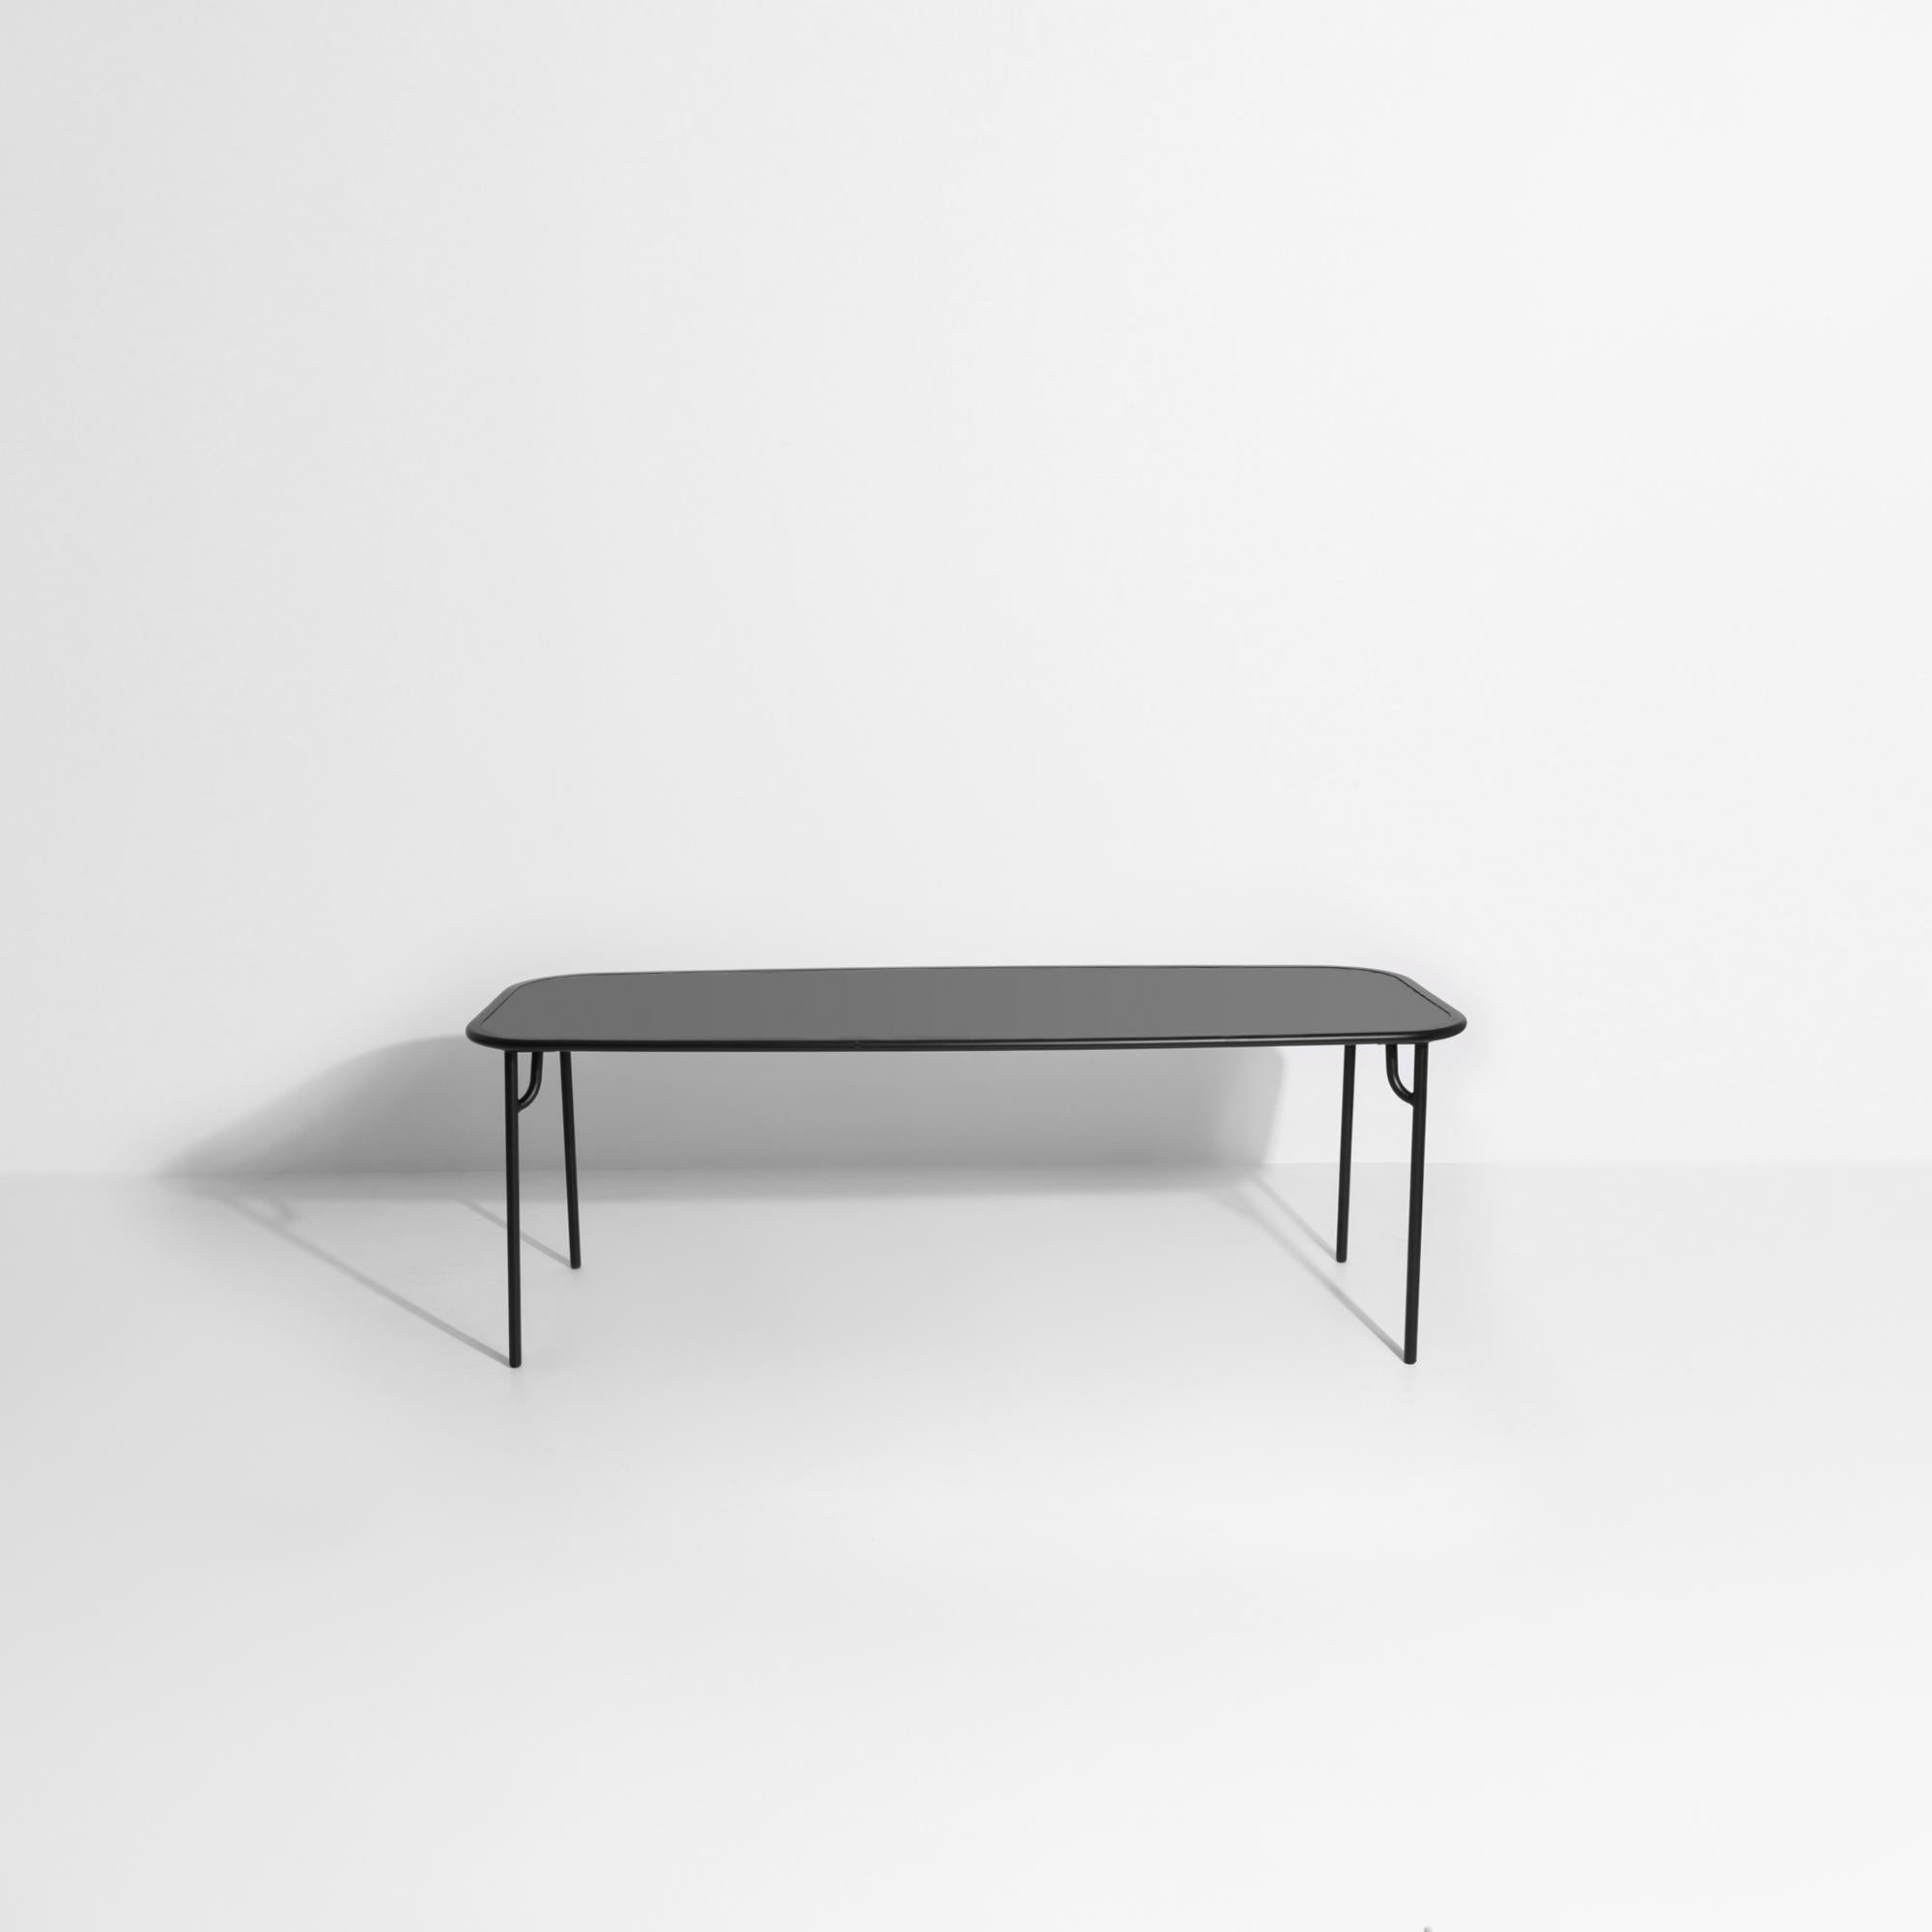 Petite Friture Week-End Large Plain Rectangular Dining Table in Black Aluminium In New Condition For Sale In Brooklyn, NY